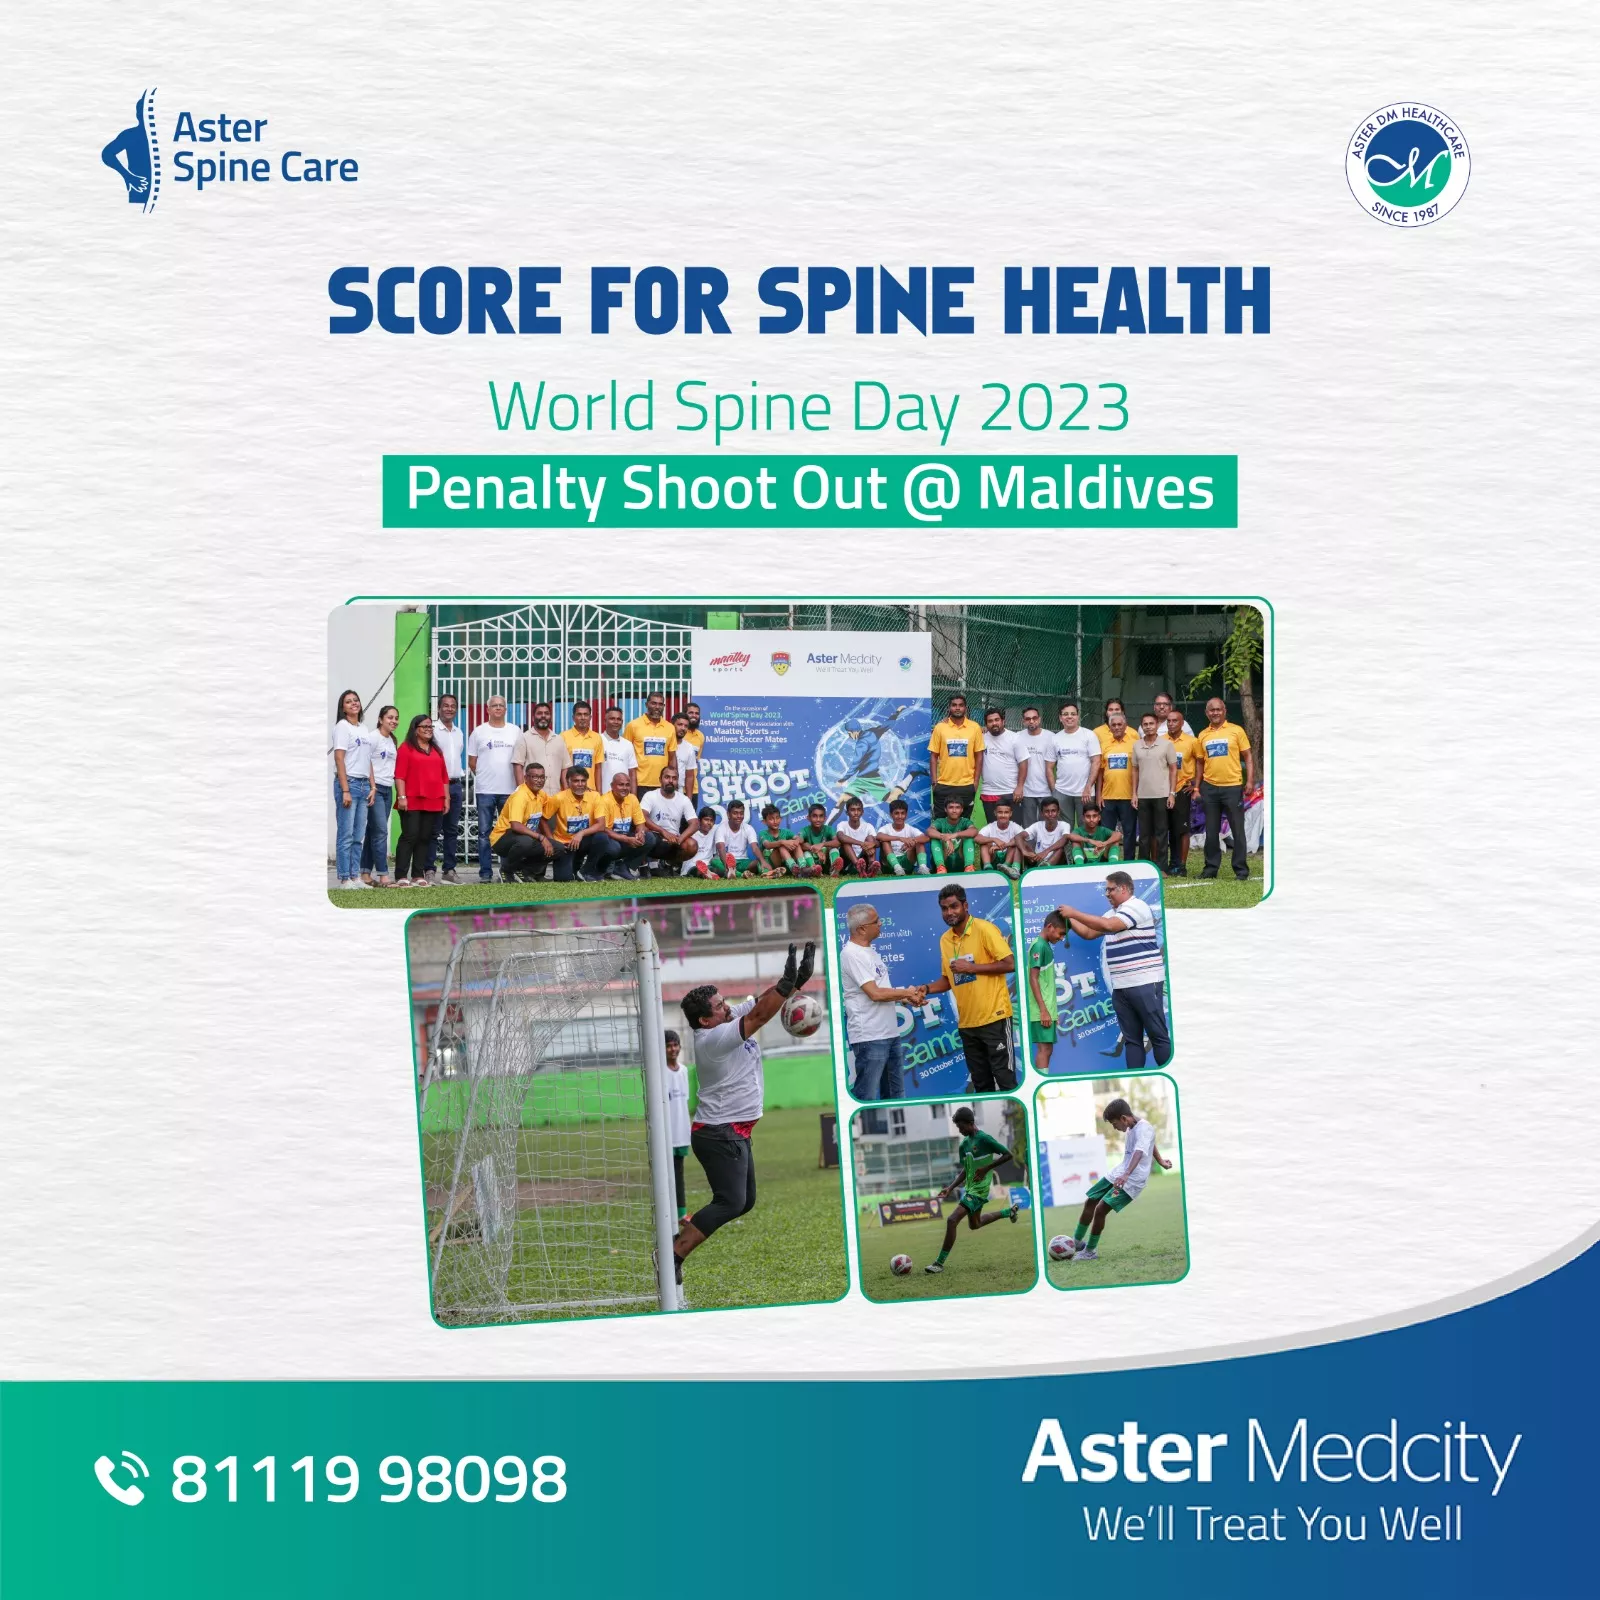 "Score for Spine Health: World Spine Day 2023 Penalty Shoot Out in Maldives"